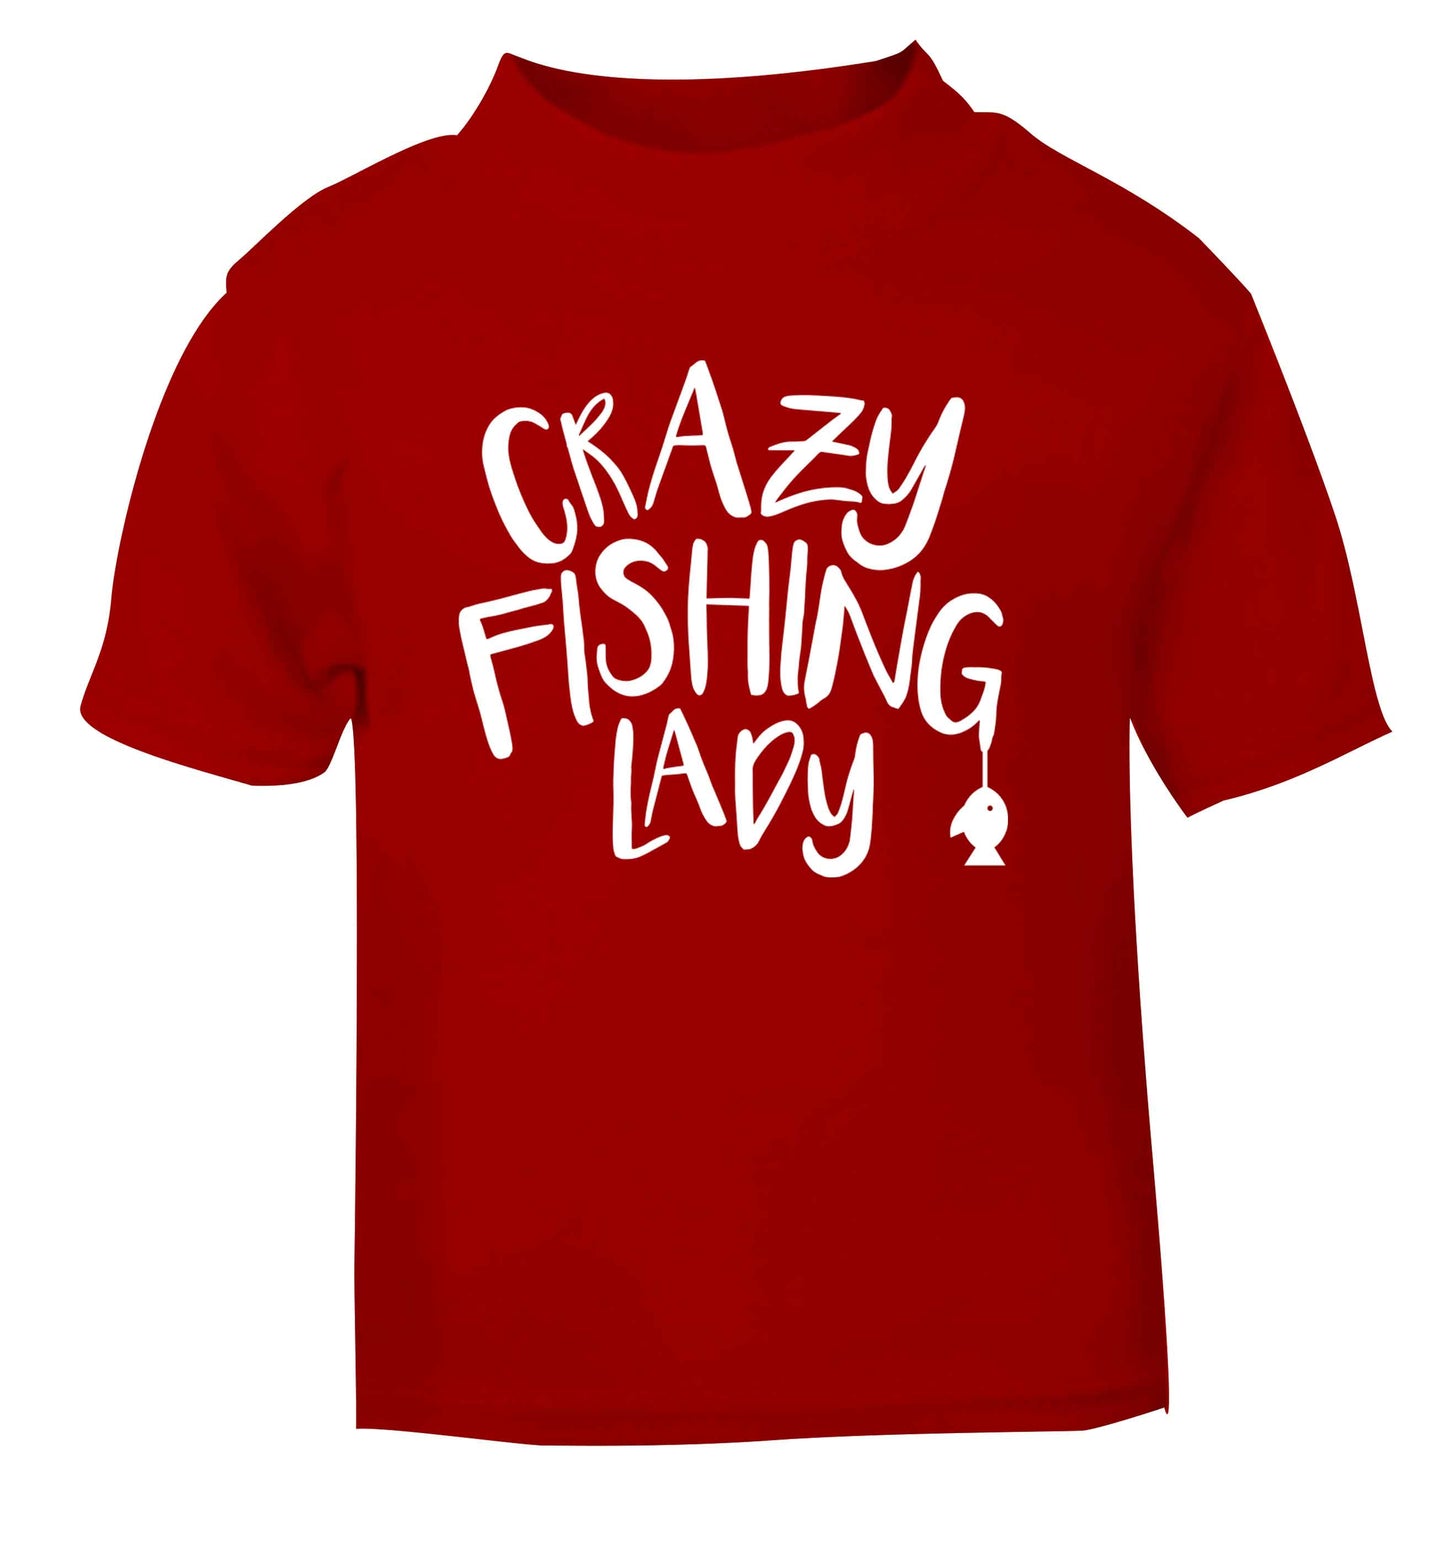 Crazy fishing lady red Baby Toddler Tshirt 2 Years